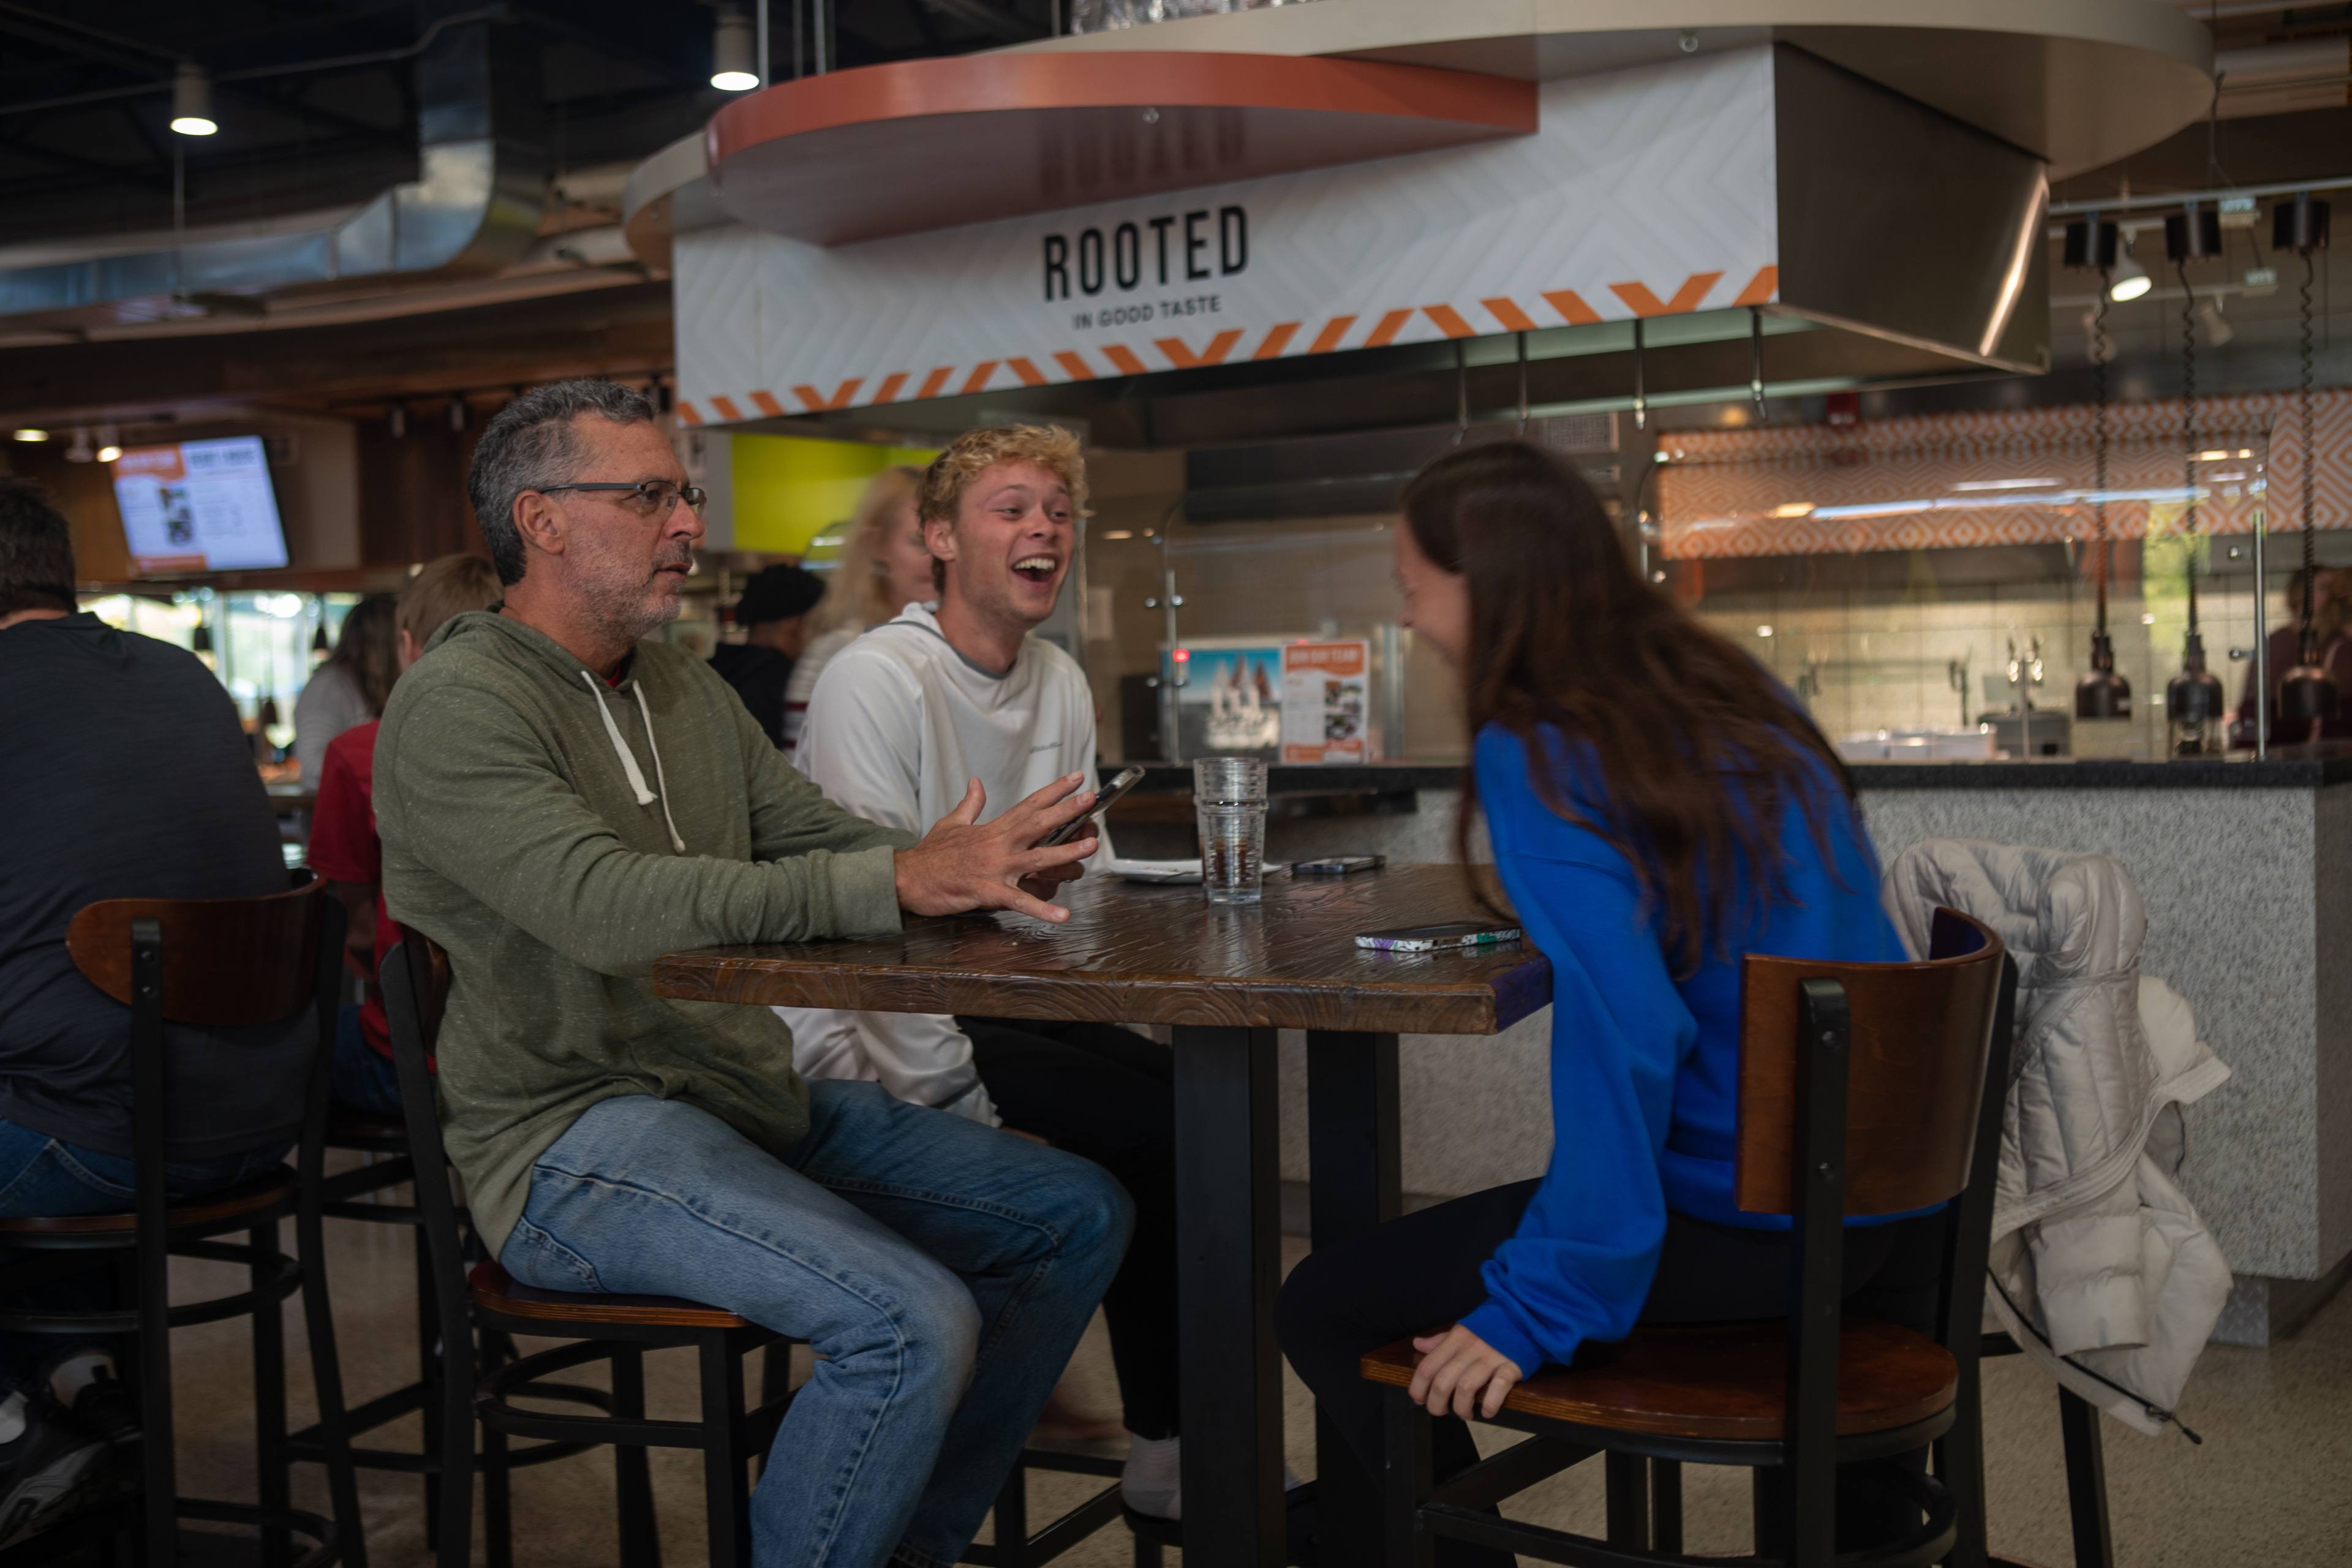 Three people at a table laughing